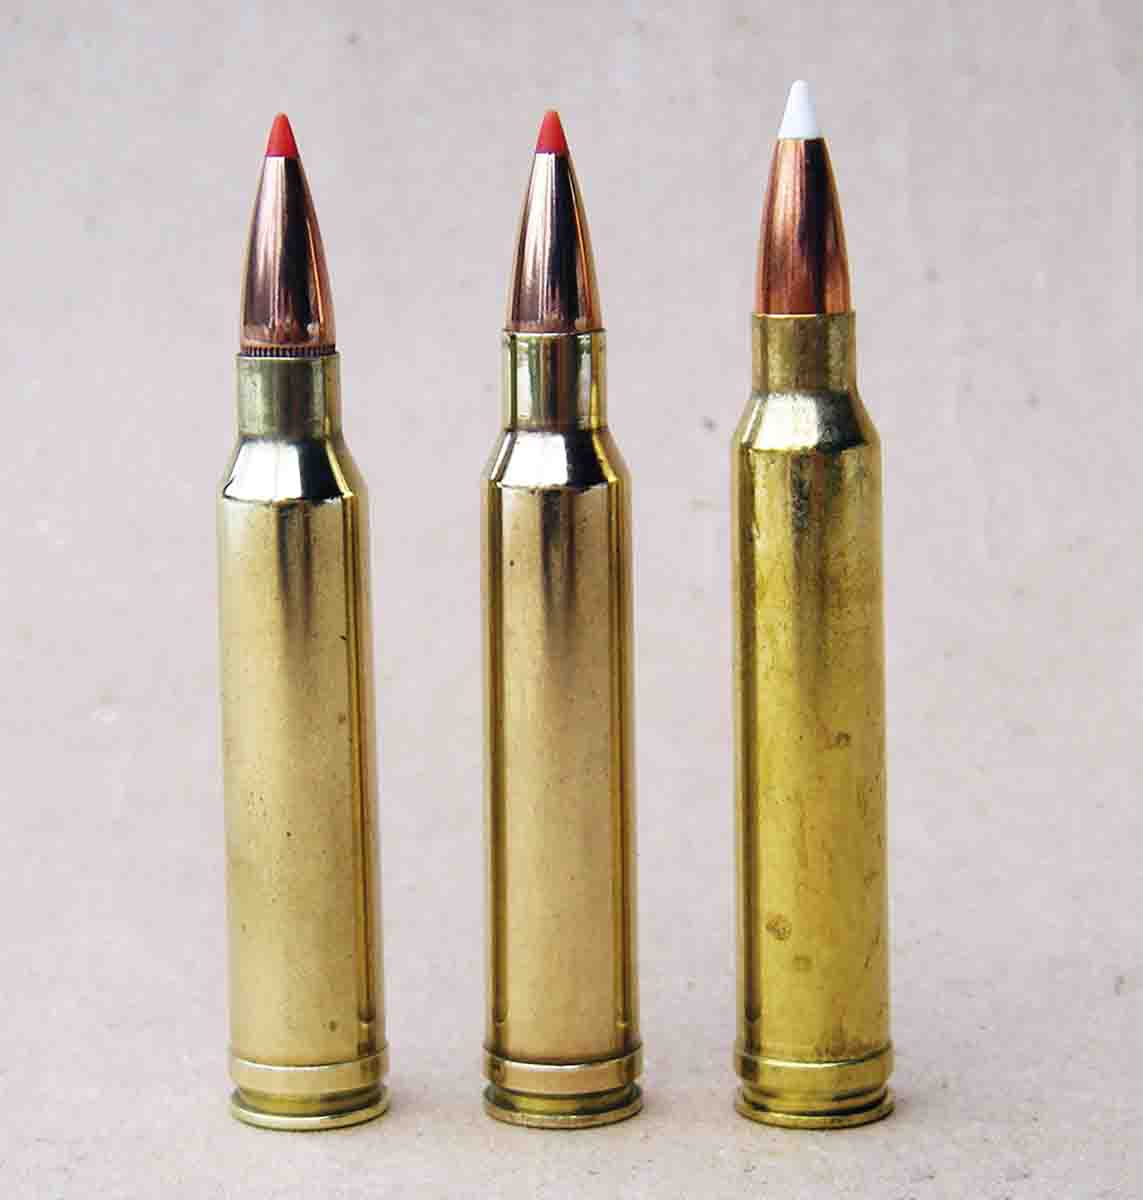 Many people expected Winchester to neck down the .338 Winchester Magnum case to create its .30-caliber magnum. However, Winchester chose to move the shoulder forward and increase powder capacity. Shown from left is the .30-338 wildcat, .308 Norma Magnum and .300 Winchester Magnum.